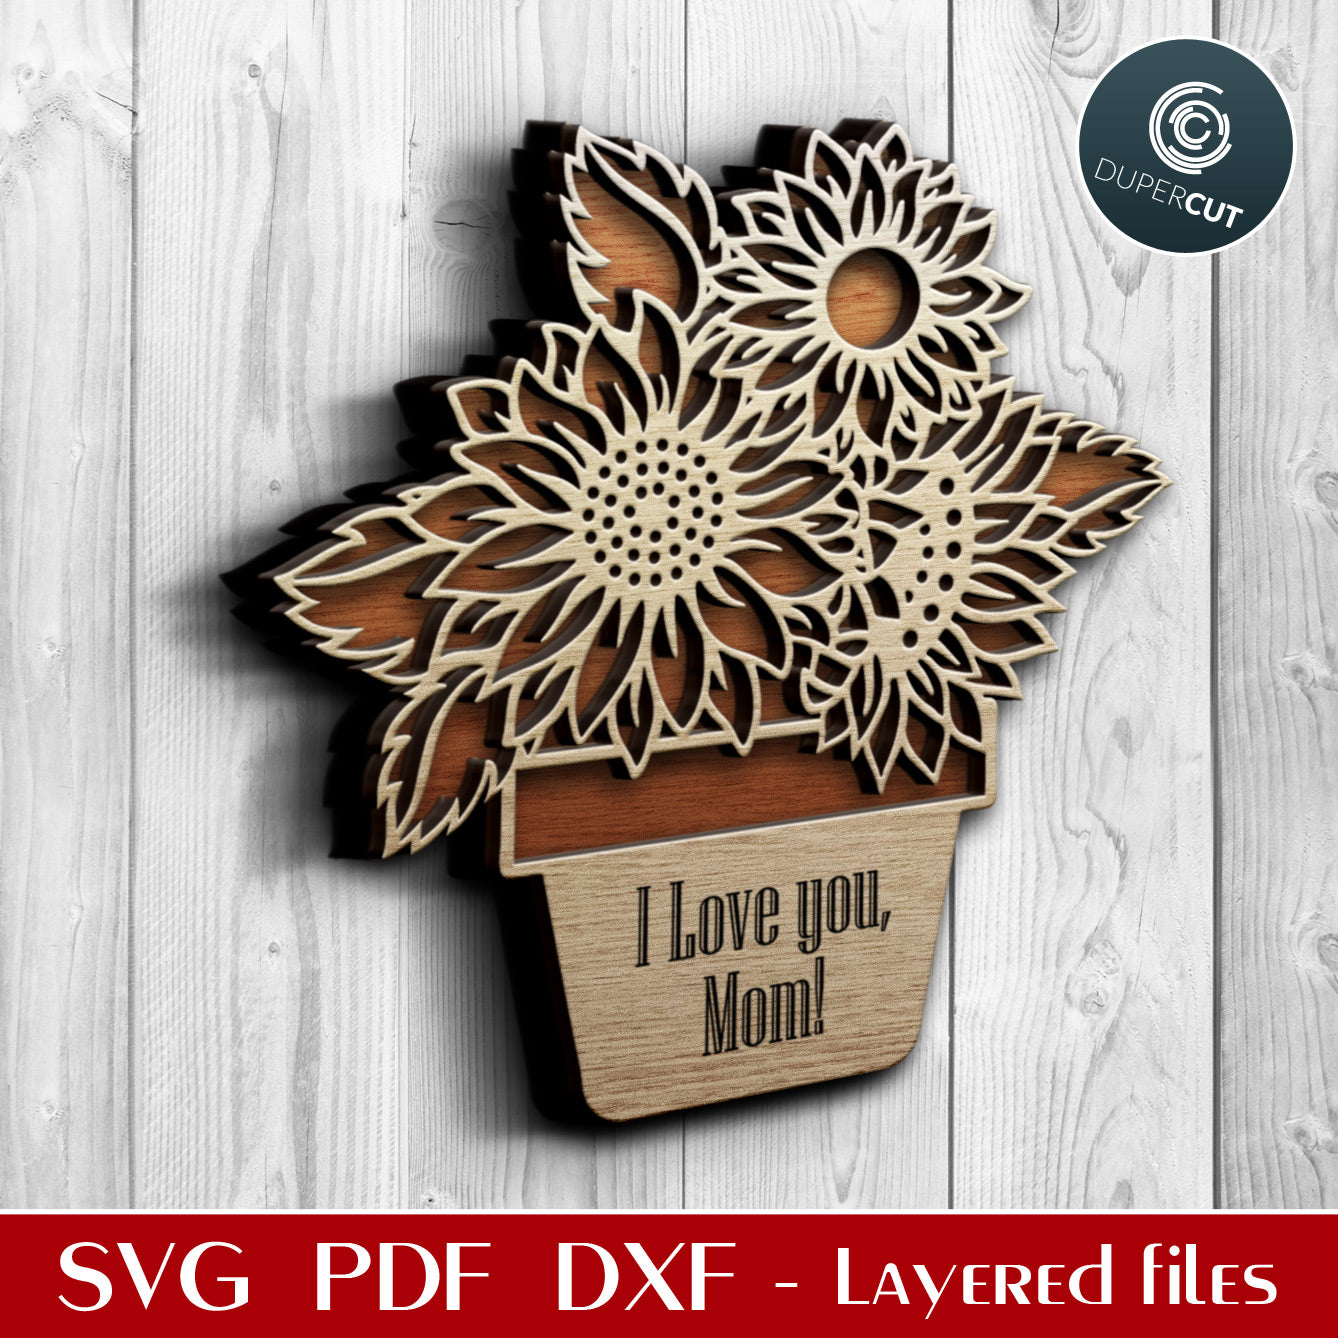 Mother's day gift - personalized flower pot SVG PDF DXF layered vector files for Cricut, Silhouette Cameo, Glowforge, laser machines